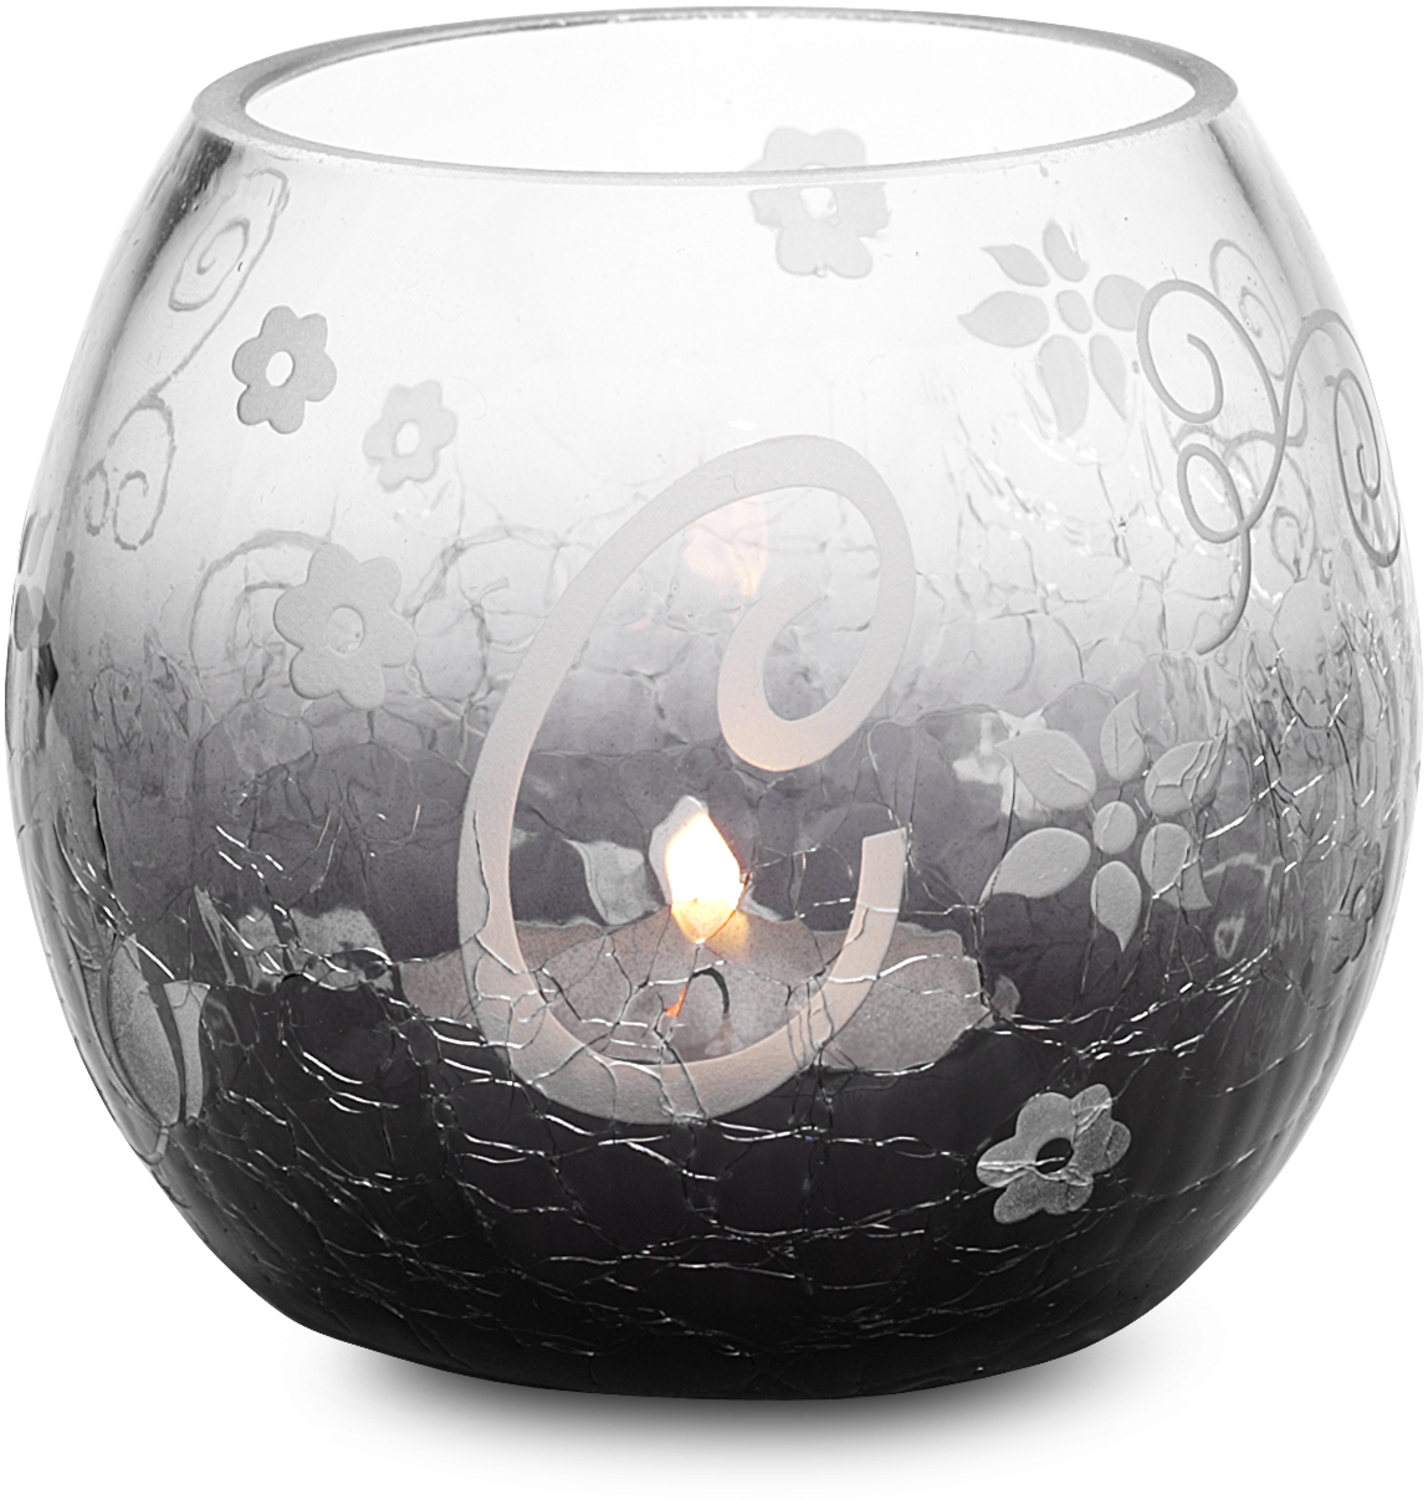 D Glass Candle Holder with Tealight by Black Tie - D Glass Candle Holder with Tealight - 3.5" Crackled Glass